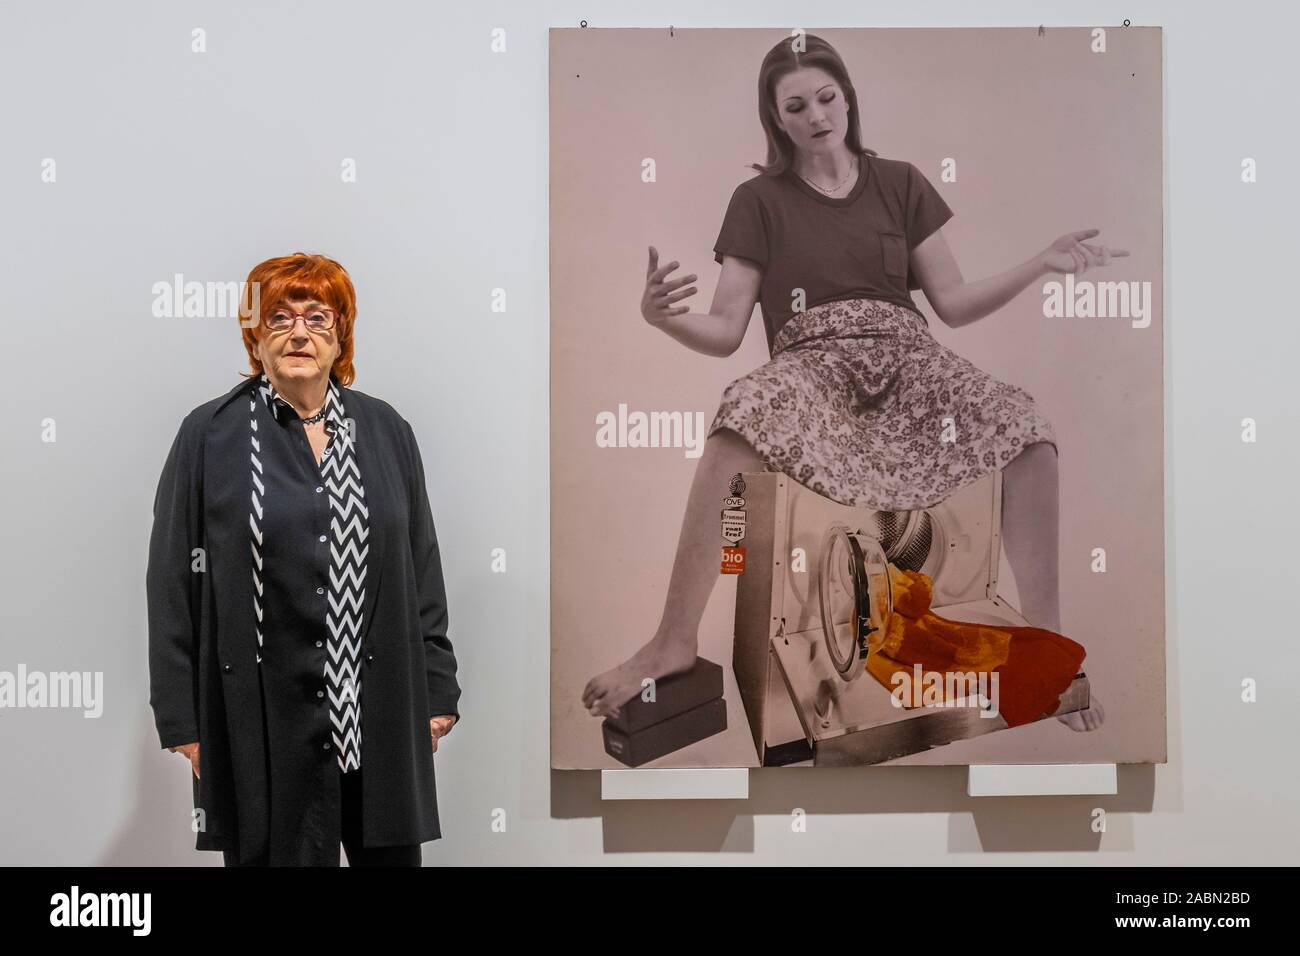 London, UK. 28th Nov, 2019. Valie Export with Die Geburtenmadonna, 19726- The First Show at Galerie Thaddaeus Ropac London of artist Valie Export, an Icon of International Feminist and New Media Art. Galerie Thaddaeus Ropac hosts separate shows by two artists simultaneously. Credit: Guy Bell/Alamy Live News Stock Photo